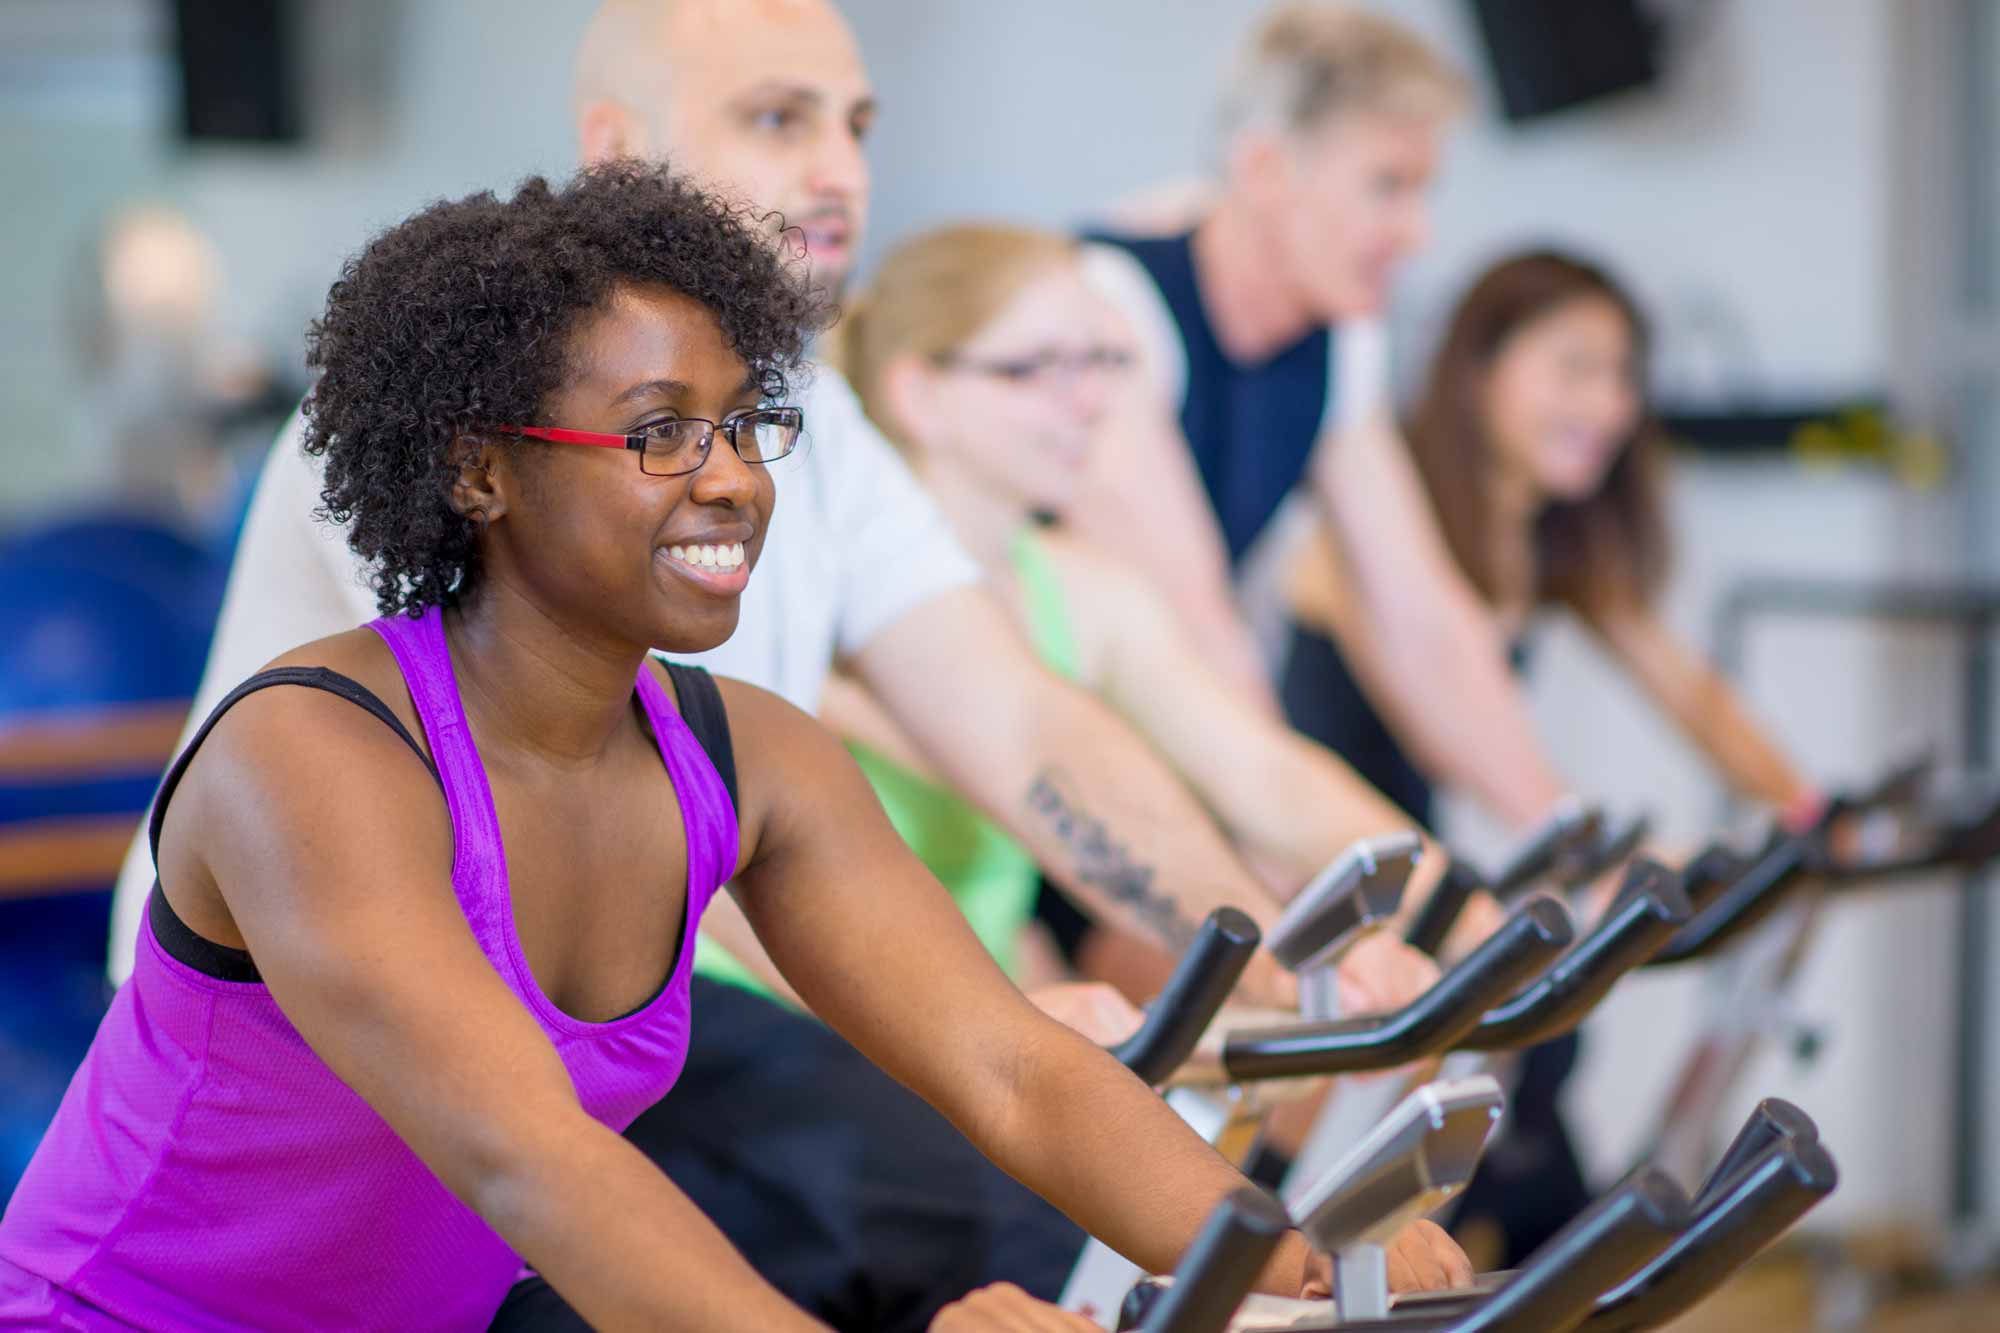 Group of people enjoying a spin class, lady in focus at the front smiling.